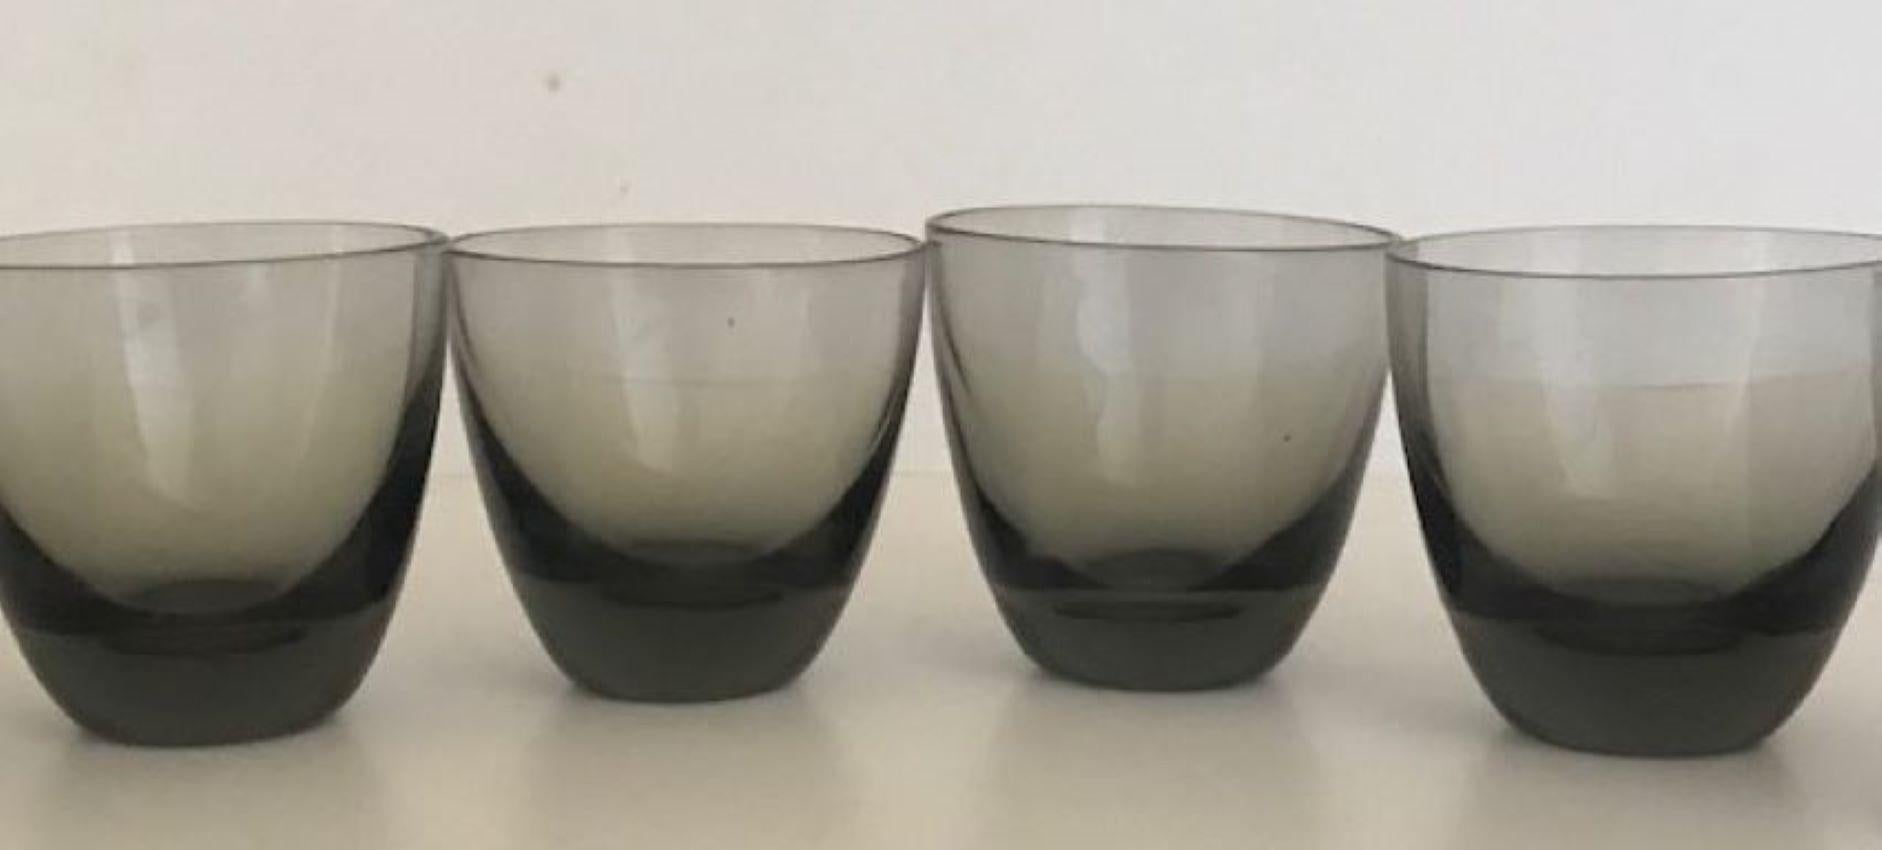 Vintage Danish Shot Glasses Attributed to Per Lutken for Holmegaard- Set of 6 In Good Condition For Sale In Ross, CA